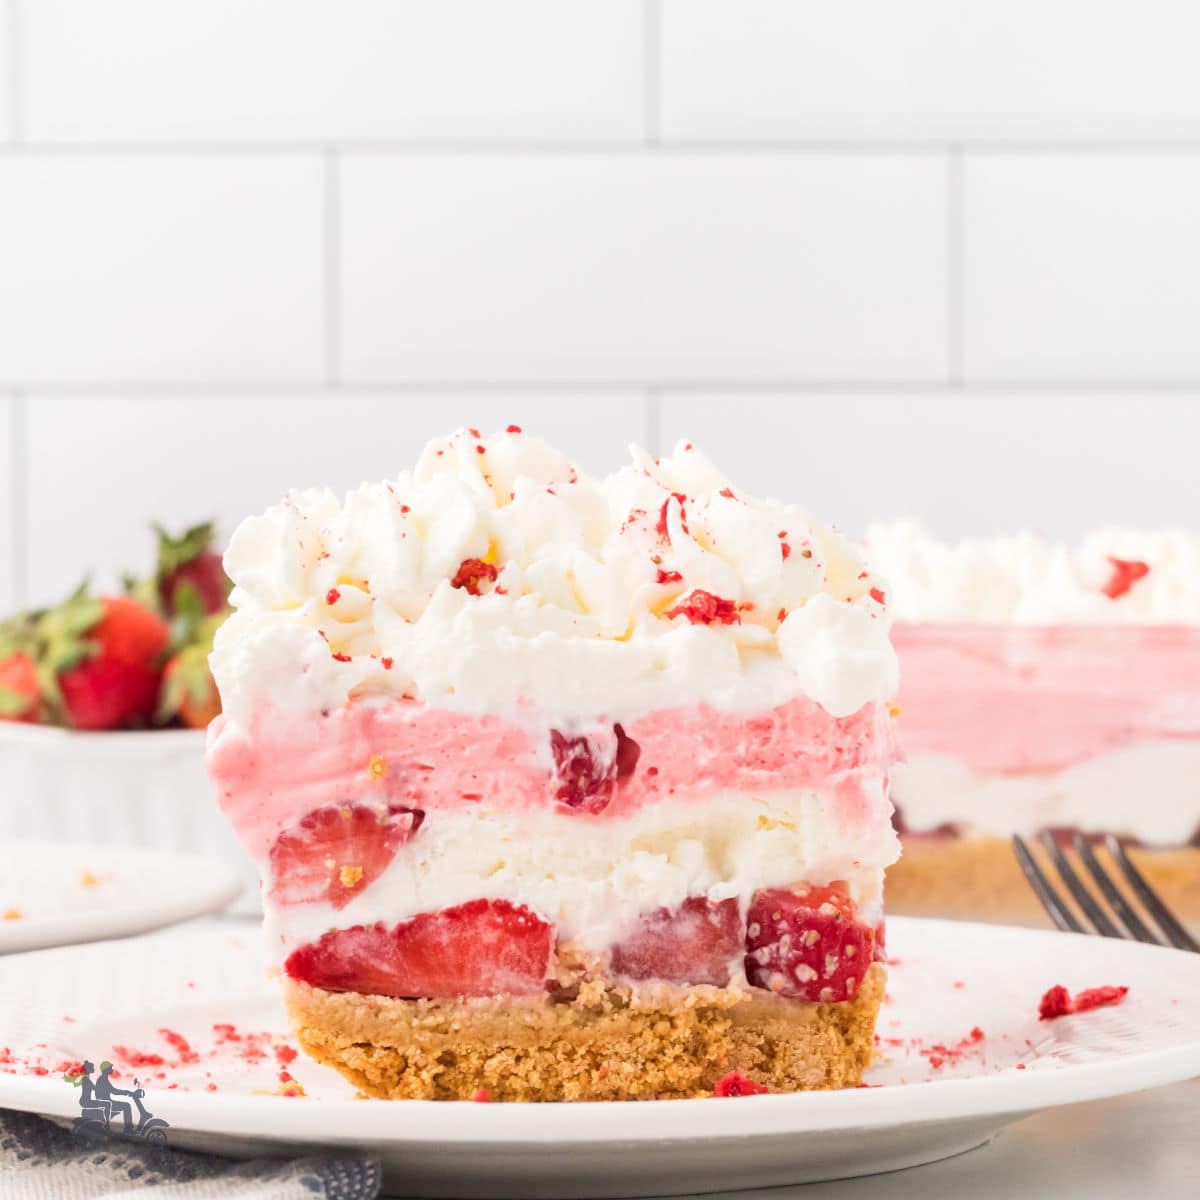 Strawberry Delight is a layered, no-bake dessert made with whipped cream, jello, and graham crackers.